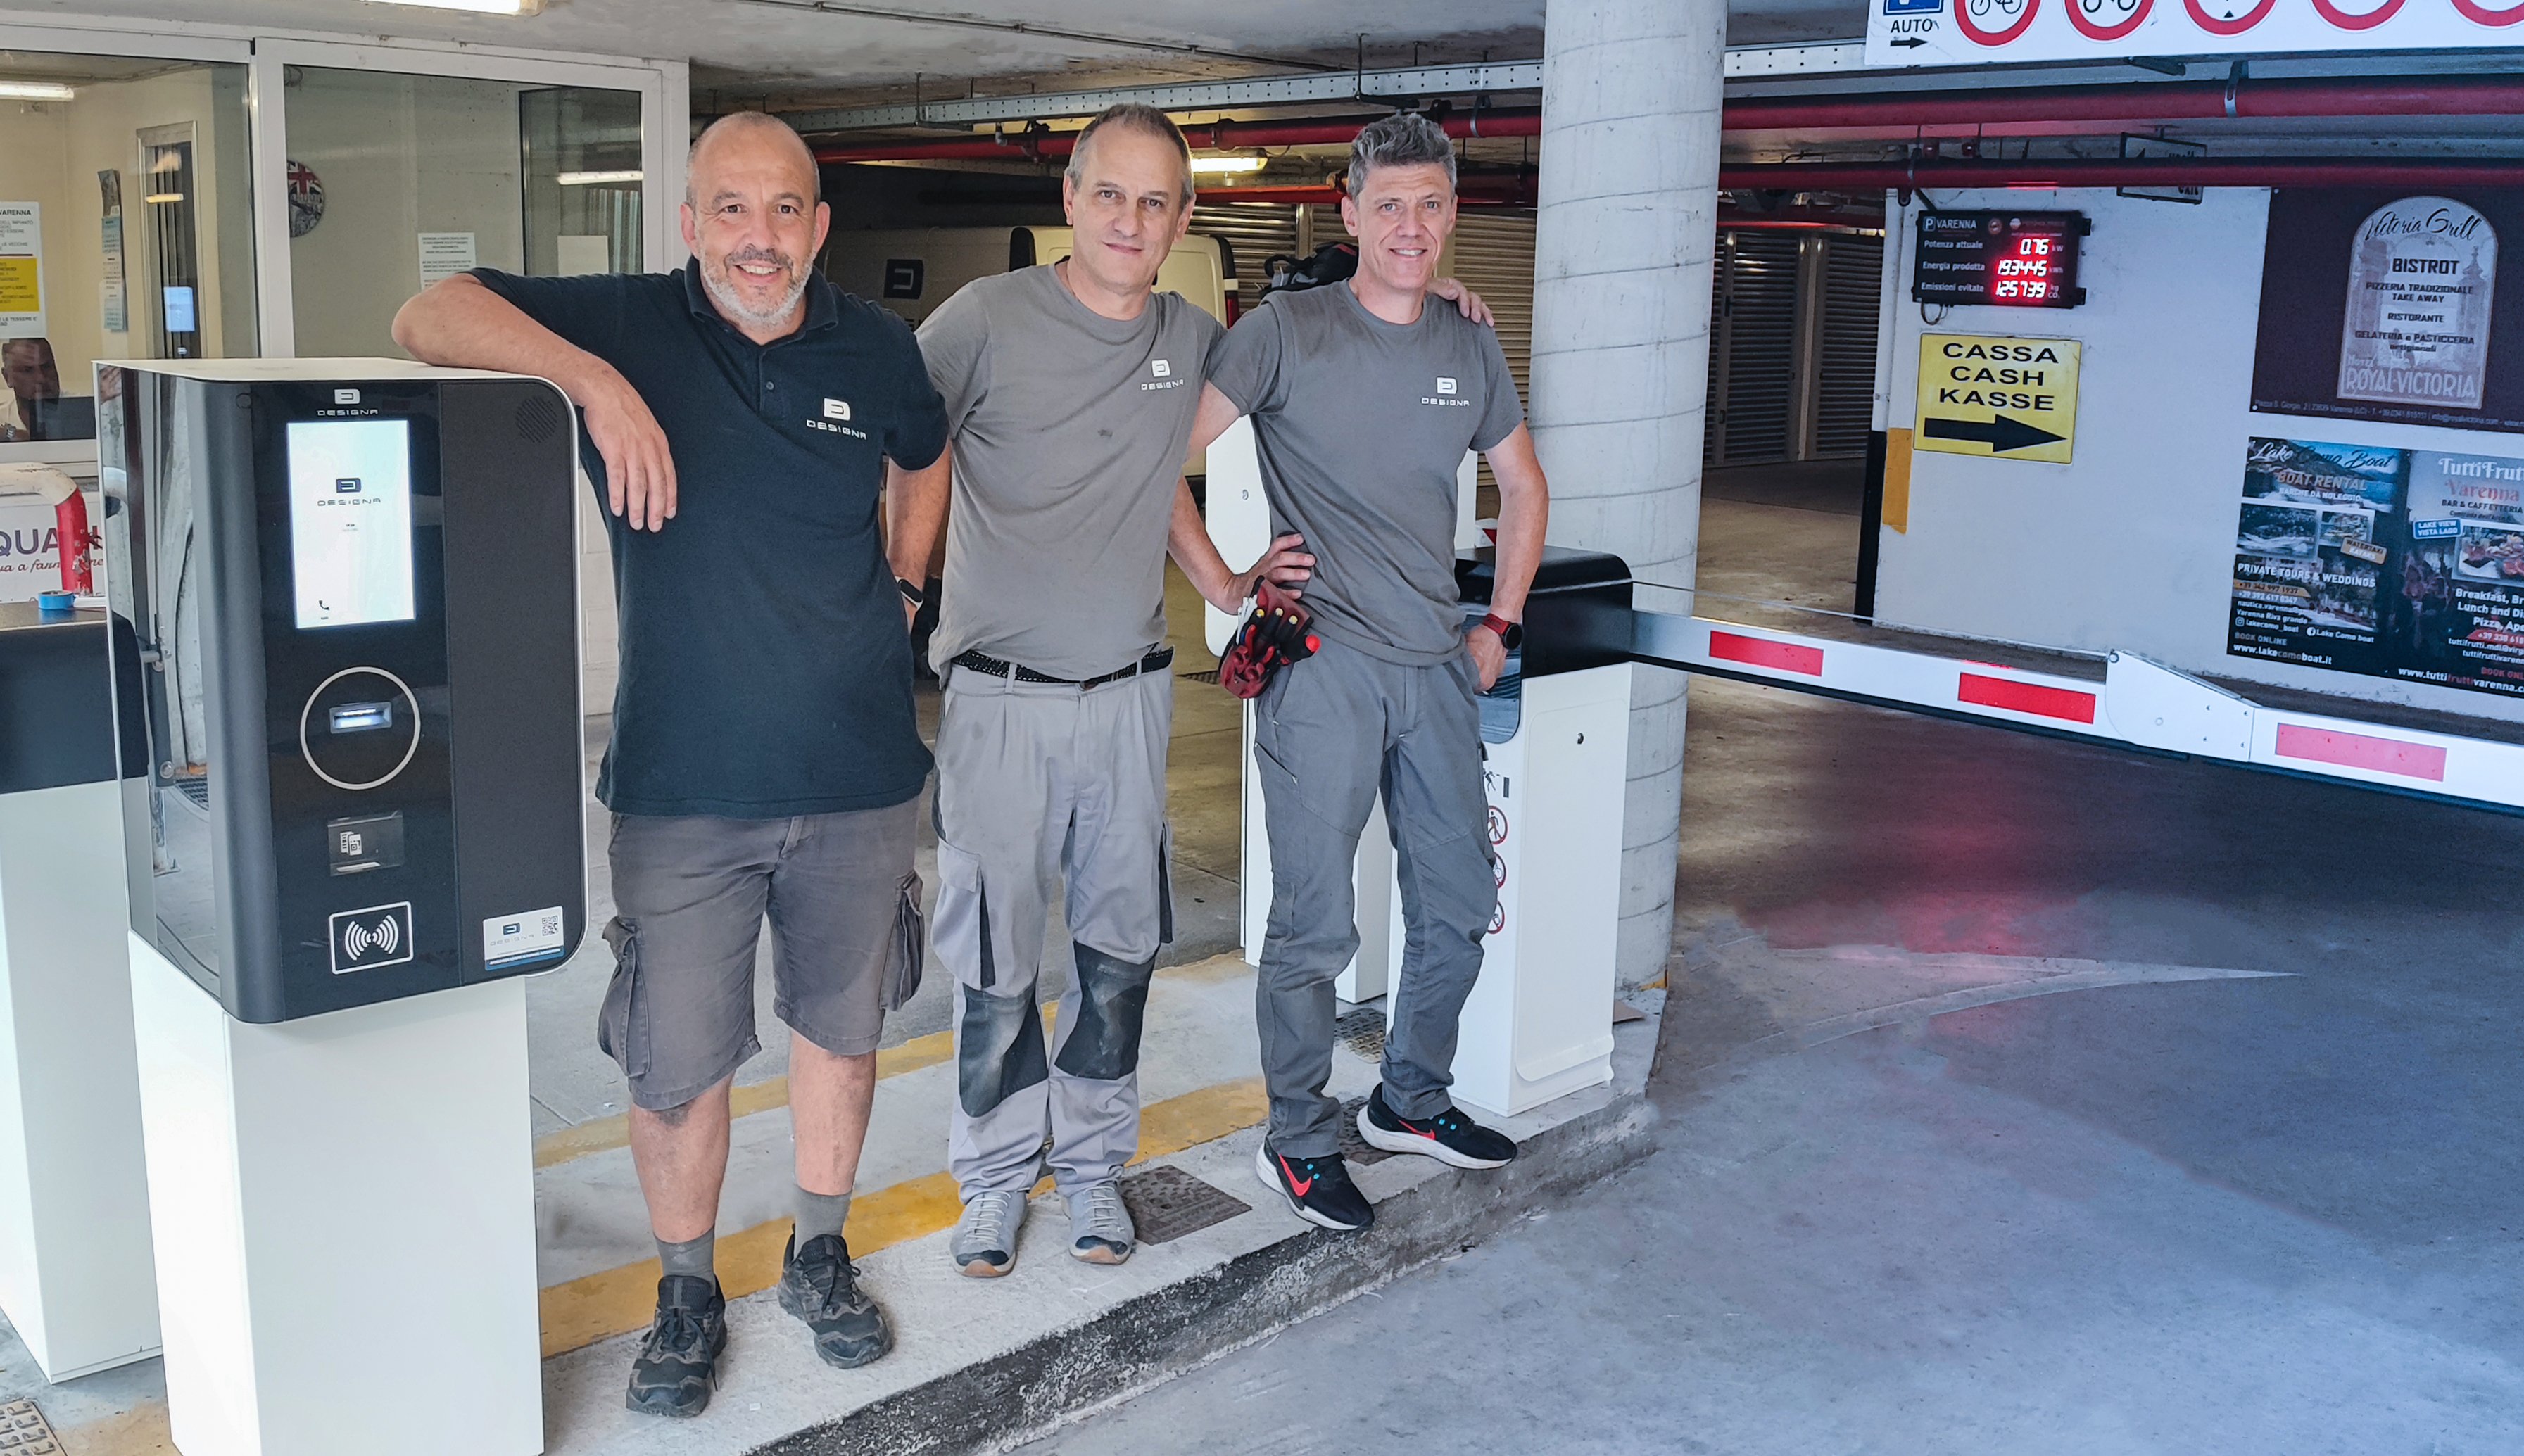 Crucial for Parking Varenna, was the rapid installation of all the equipment and the efficient start-up of the CONNECT system.